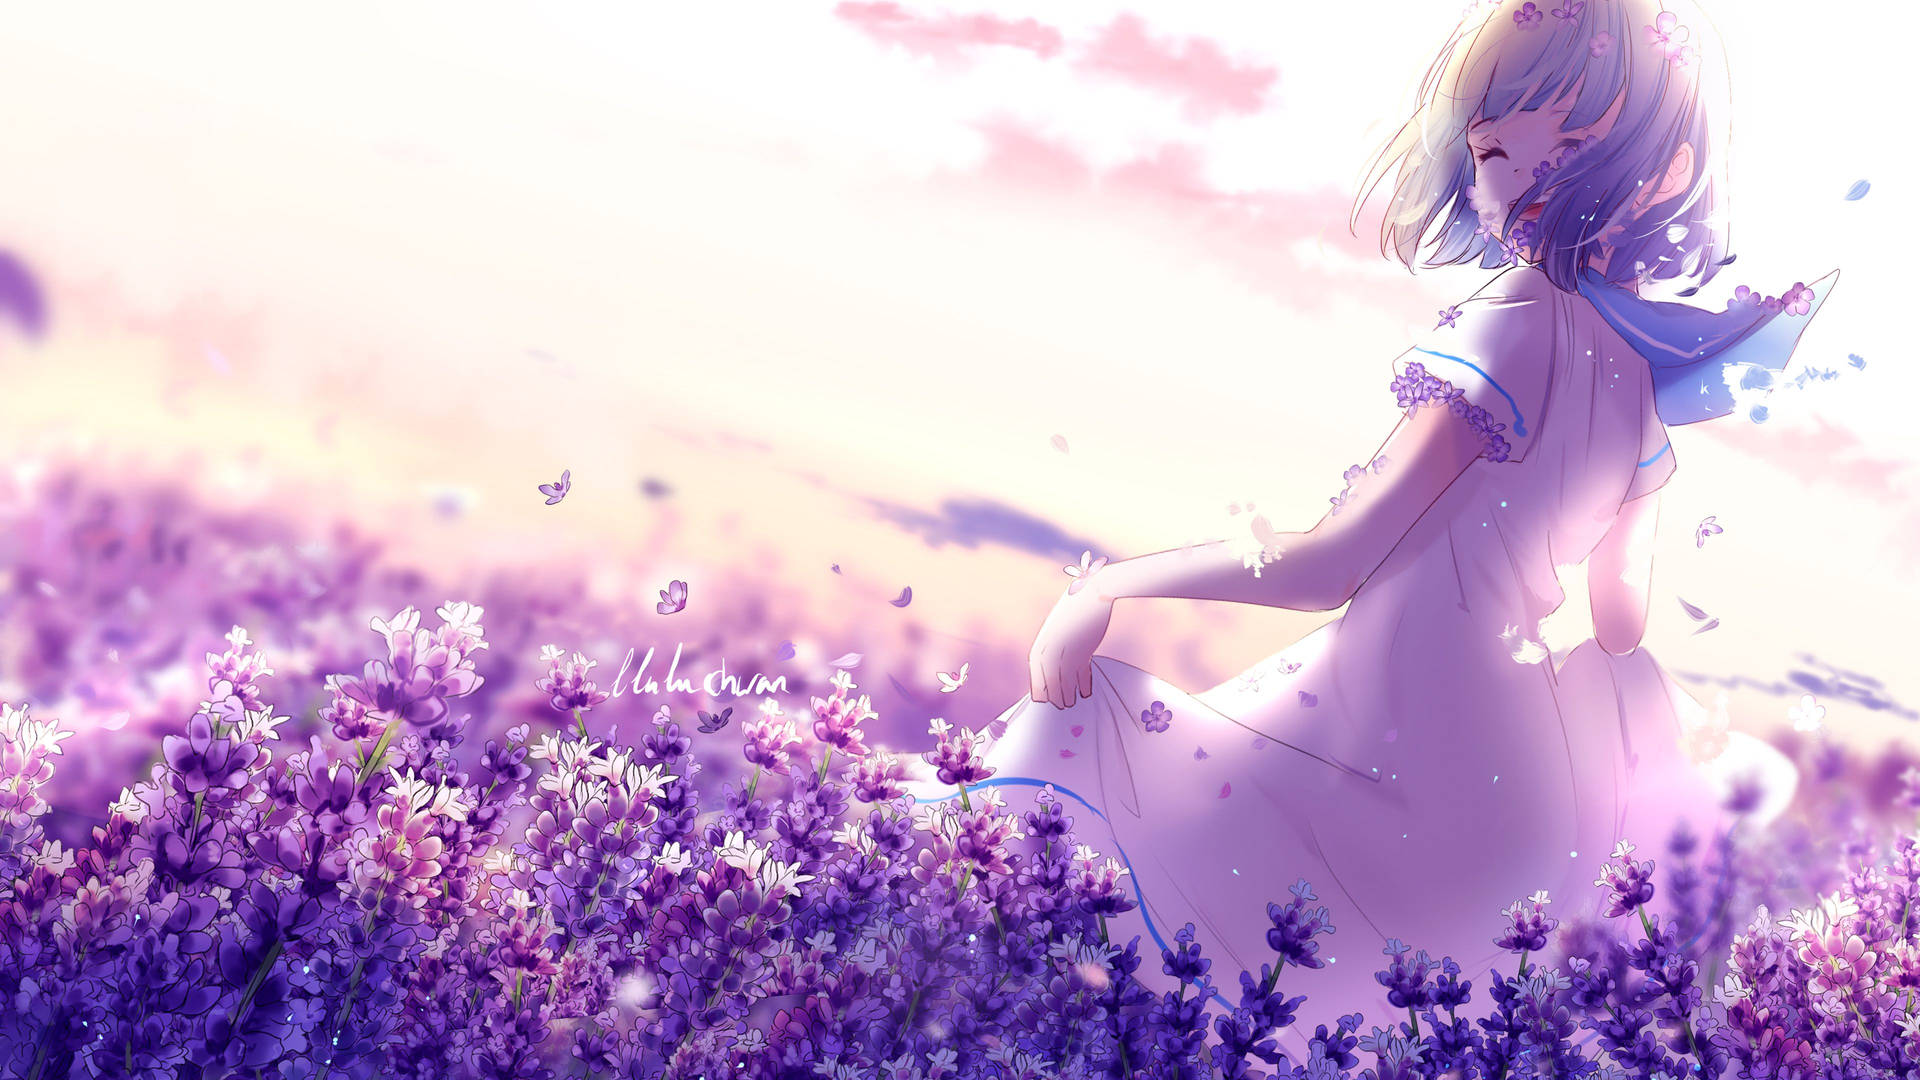 Download Anime Girl And Purple Flower Field Wallpaper